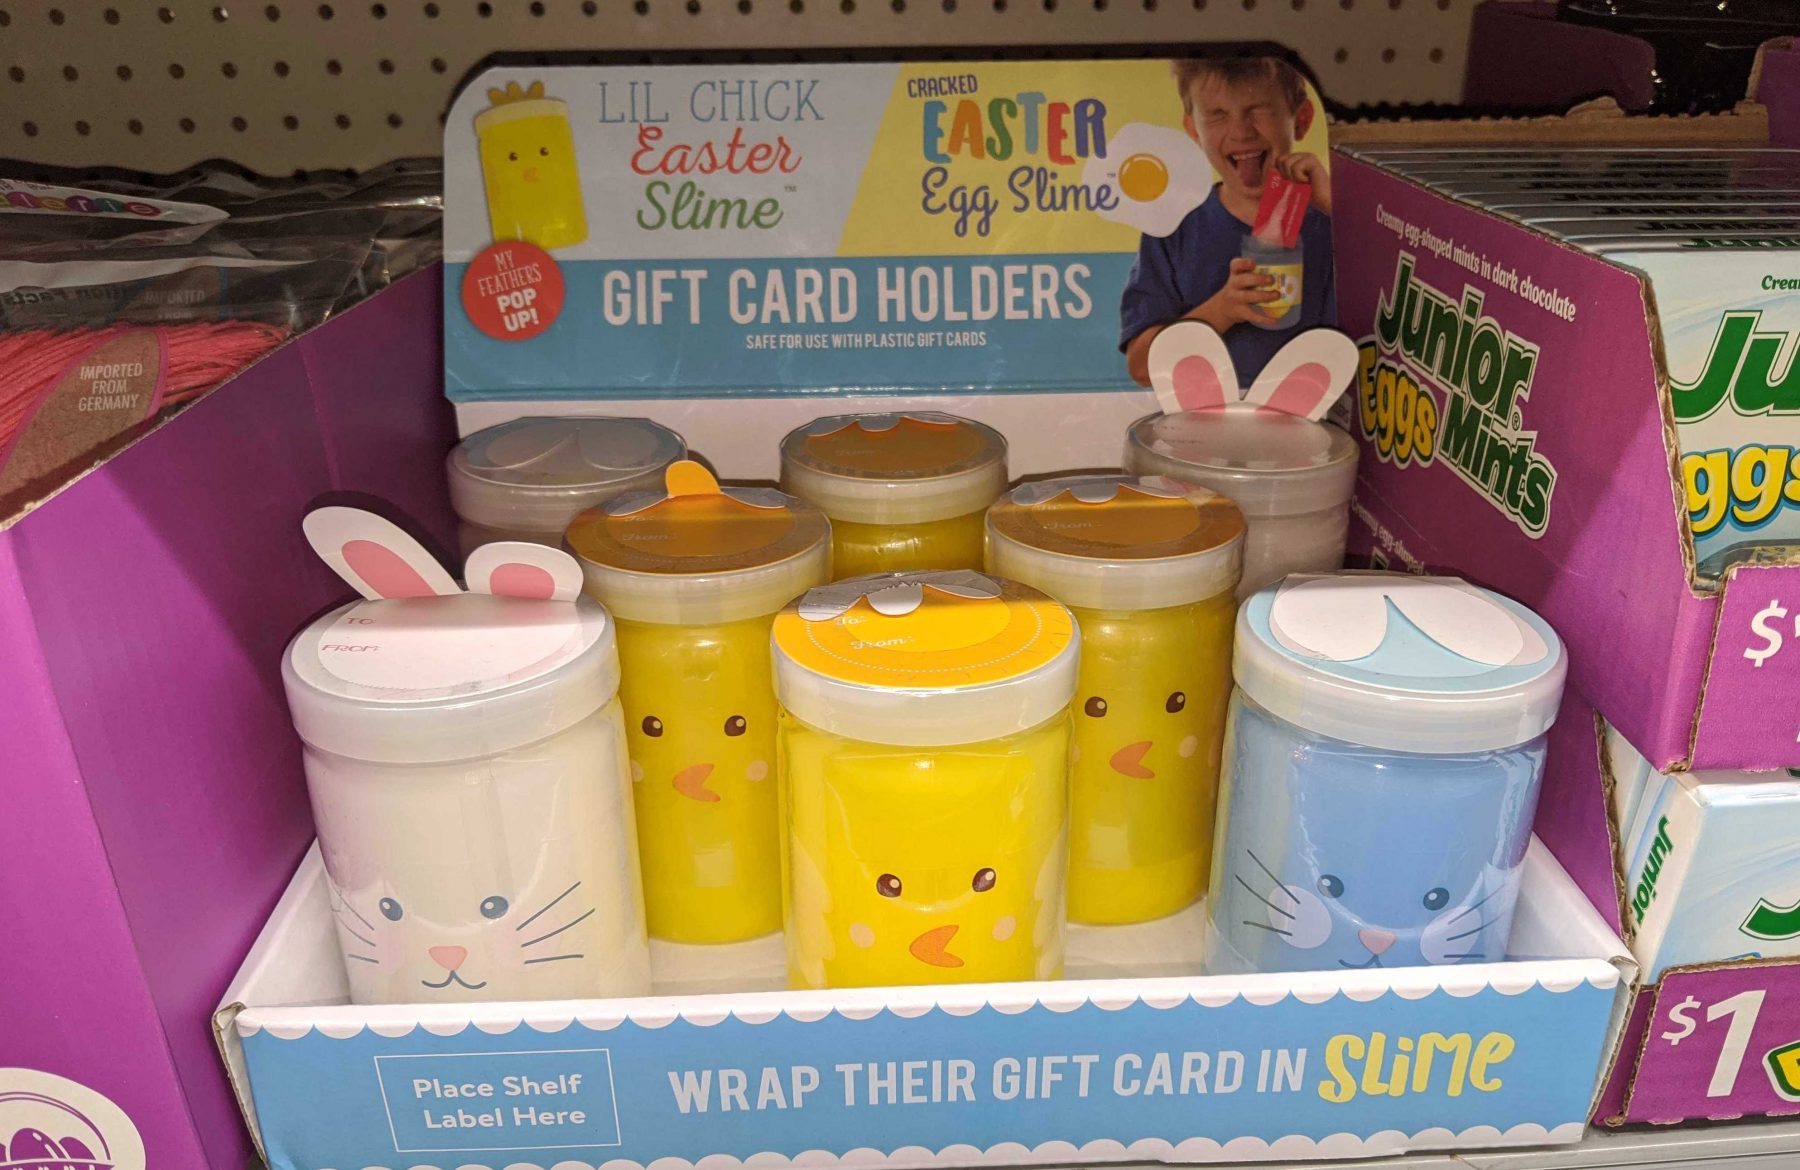 Walmart Is Selling Easter Egg Slime Gift Card Holders & They're Less Than $3